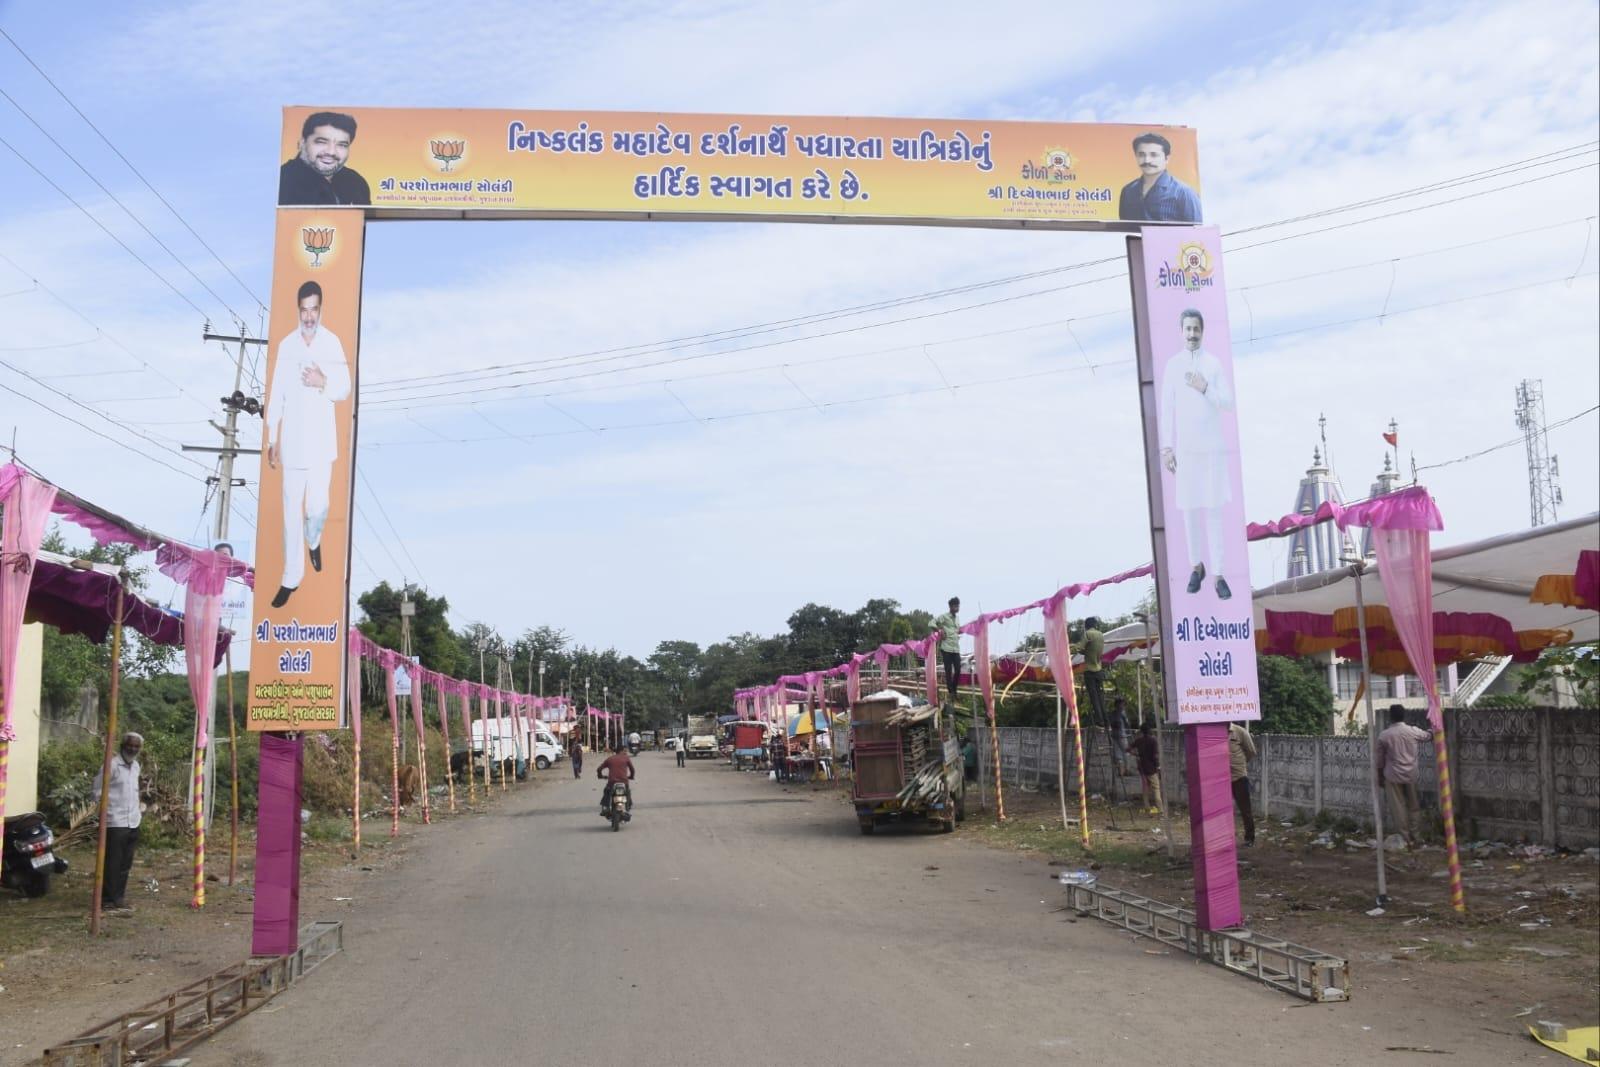 The district system is ready for the fair of Bhadravi Amas to be held at Koliyak